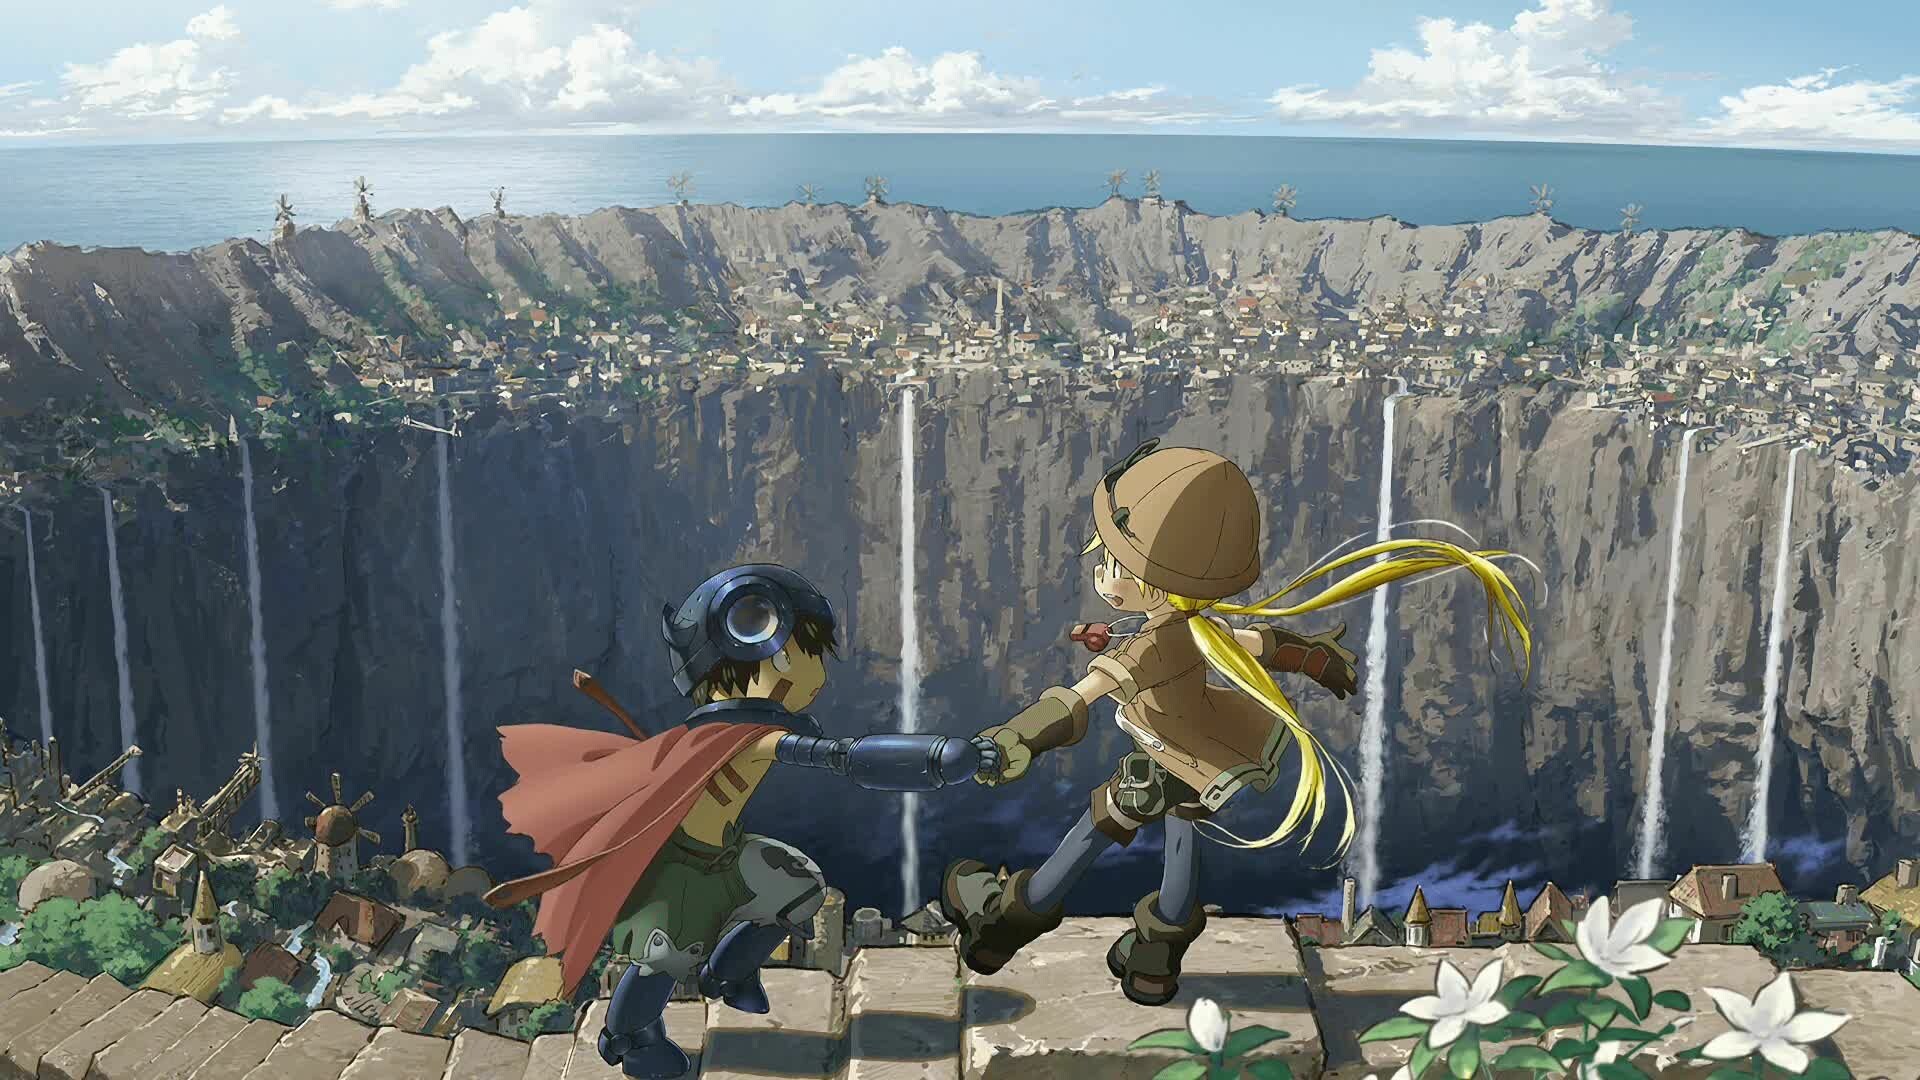 Made in Abyss (TV Series): The series won the 2018 Anime Trending Awards in the Best in Adaptation. 1920x1080 Full HD Wallpaper.